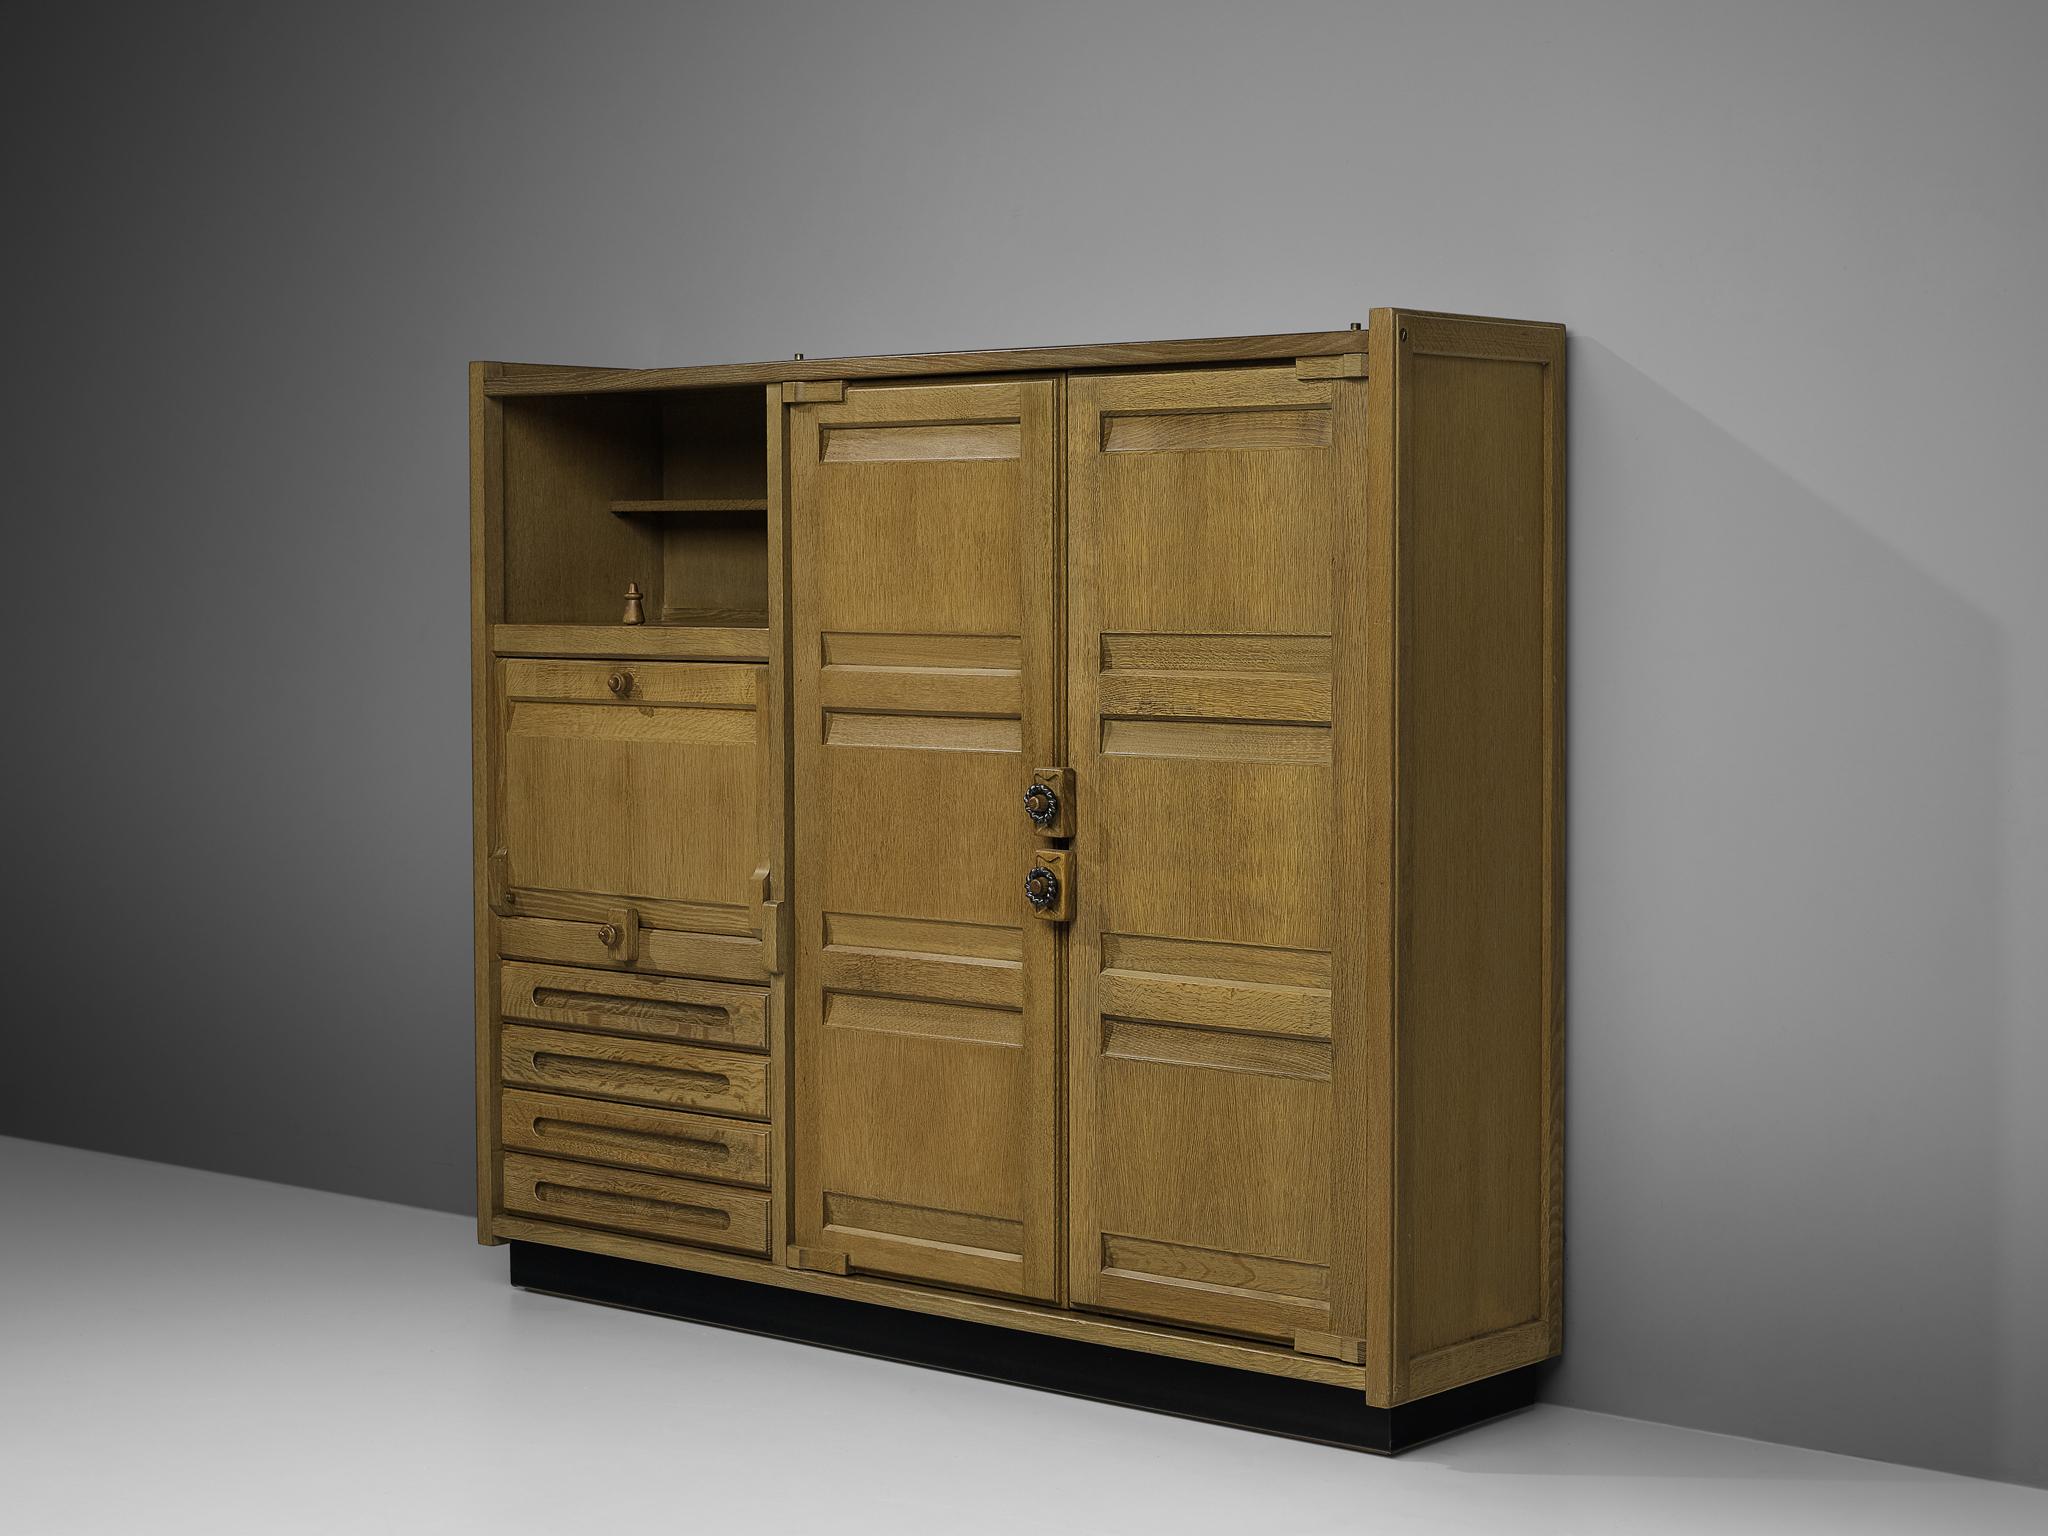 Guillerme et Chambron, highboard, green stained oak, France, 1960s

Versatile highboard by French designer duo Guillerme et Chambron. Two high doors and one colum with drawers, an open and a closed shelf are allowing great storage facilities.